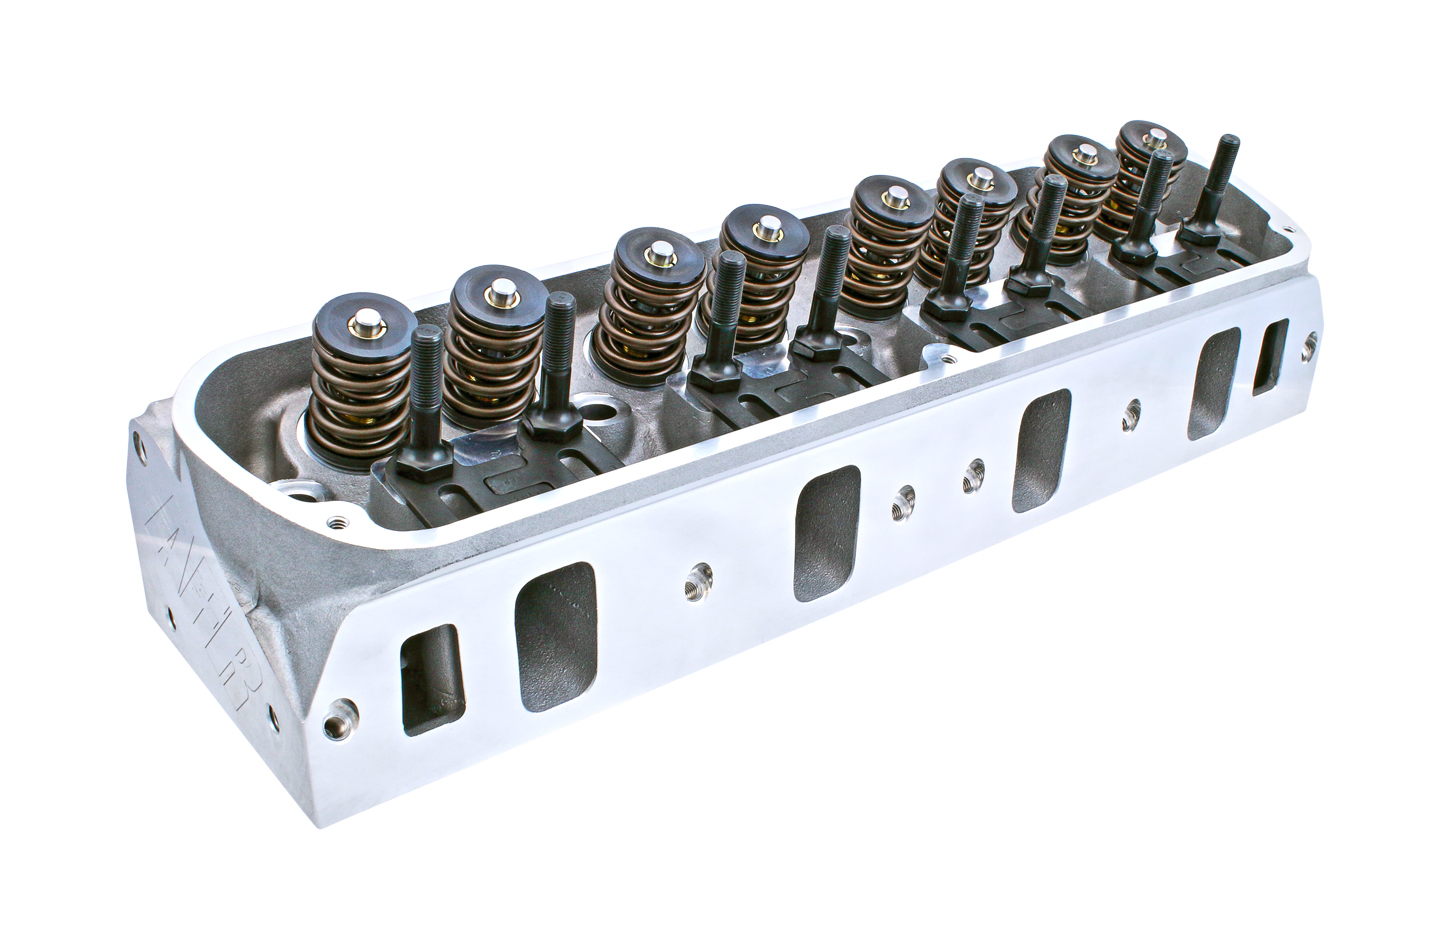 Air Flow Research 1351 Cylinder Head, Enforcer, Assembled, 2.020 / 1.600 in Valves, 185 cc Intake, 59 cc Chamber, 1.290 in Springs, Aluminum, Small Block Ford, Each